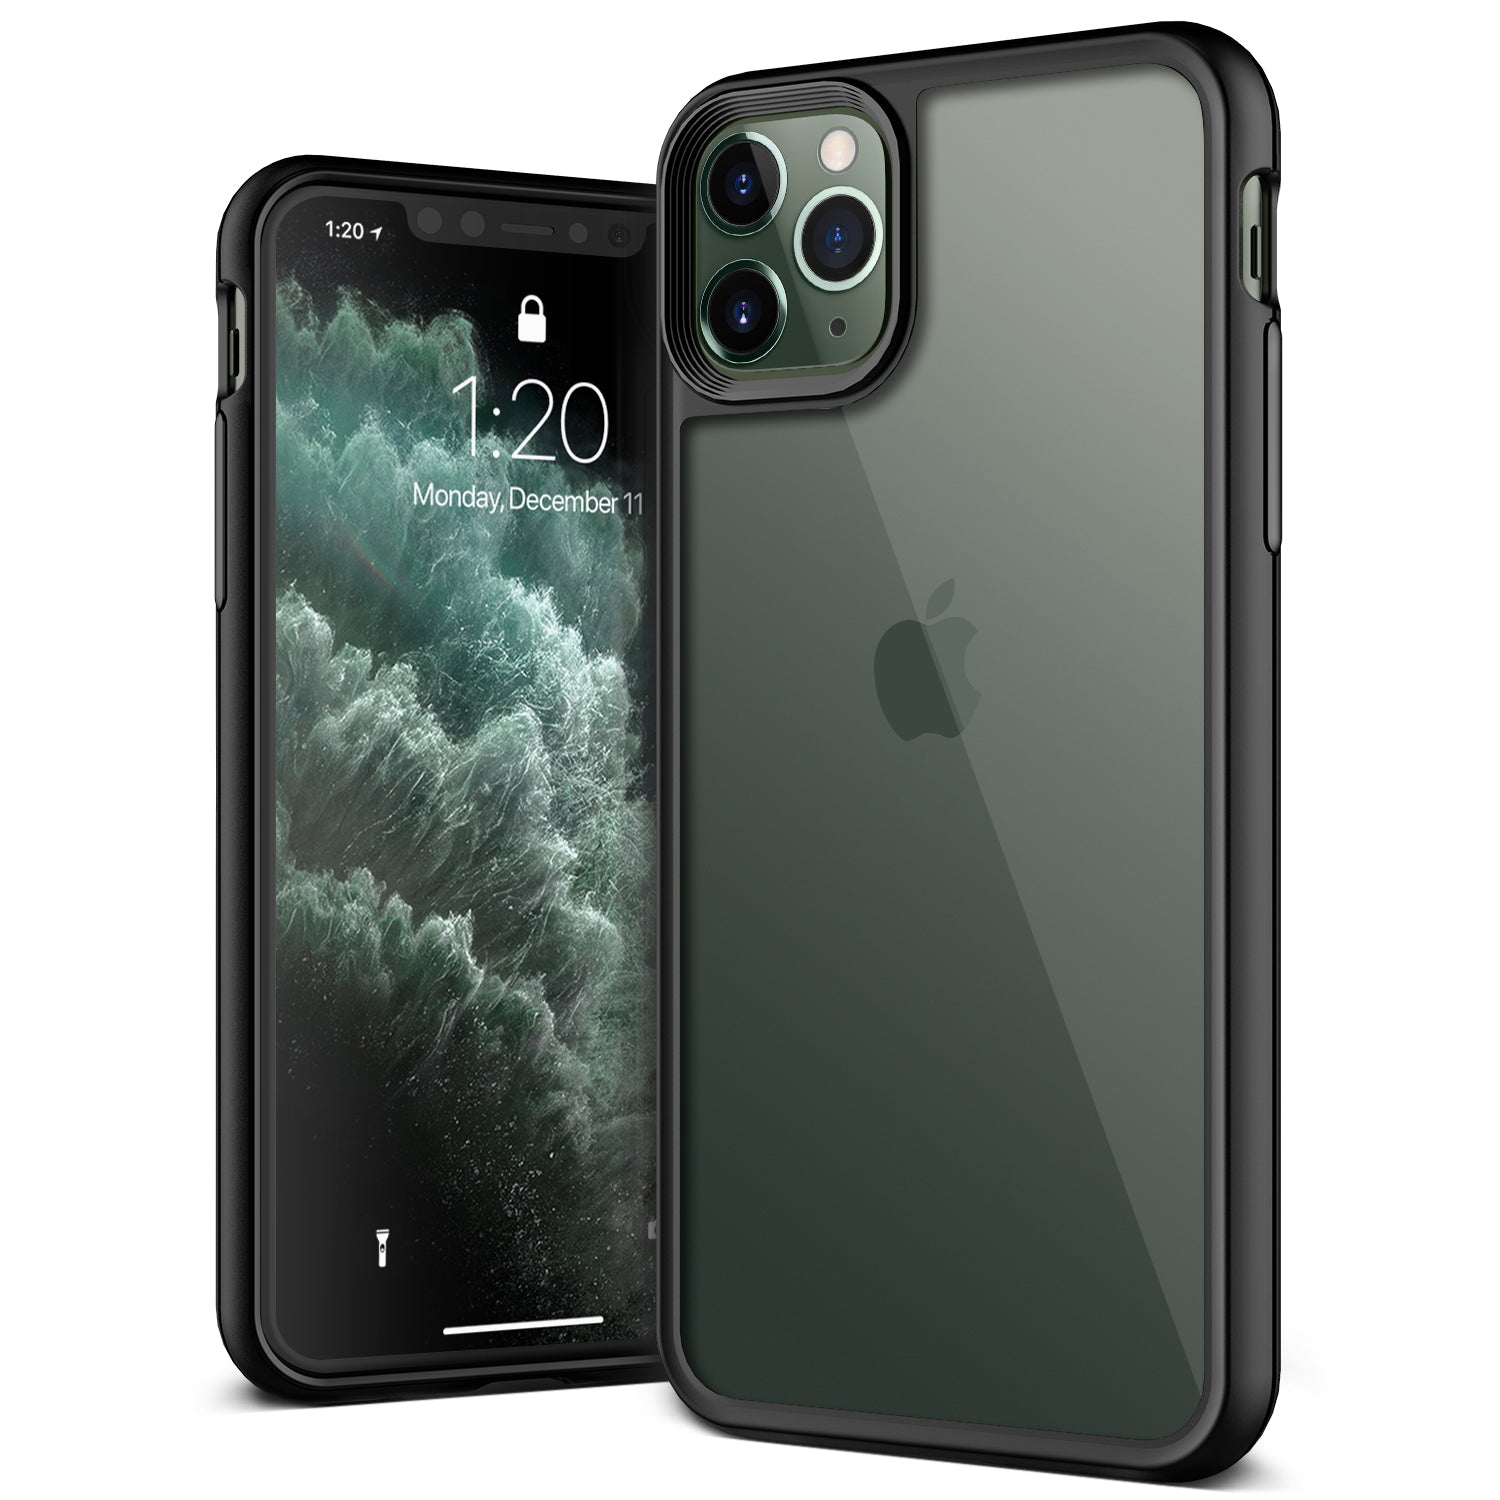 iPhone 11 Pro Max Case Damda Crystal Mixx Clear acrylic body prevent scratches and  provide flawless transparent case.